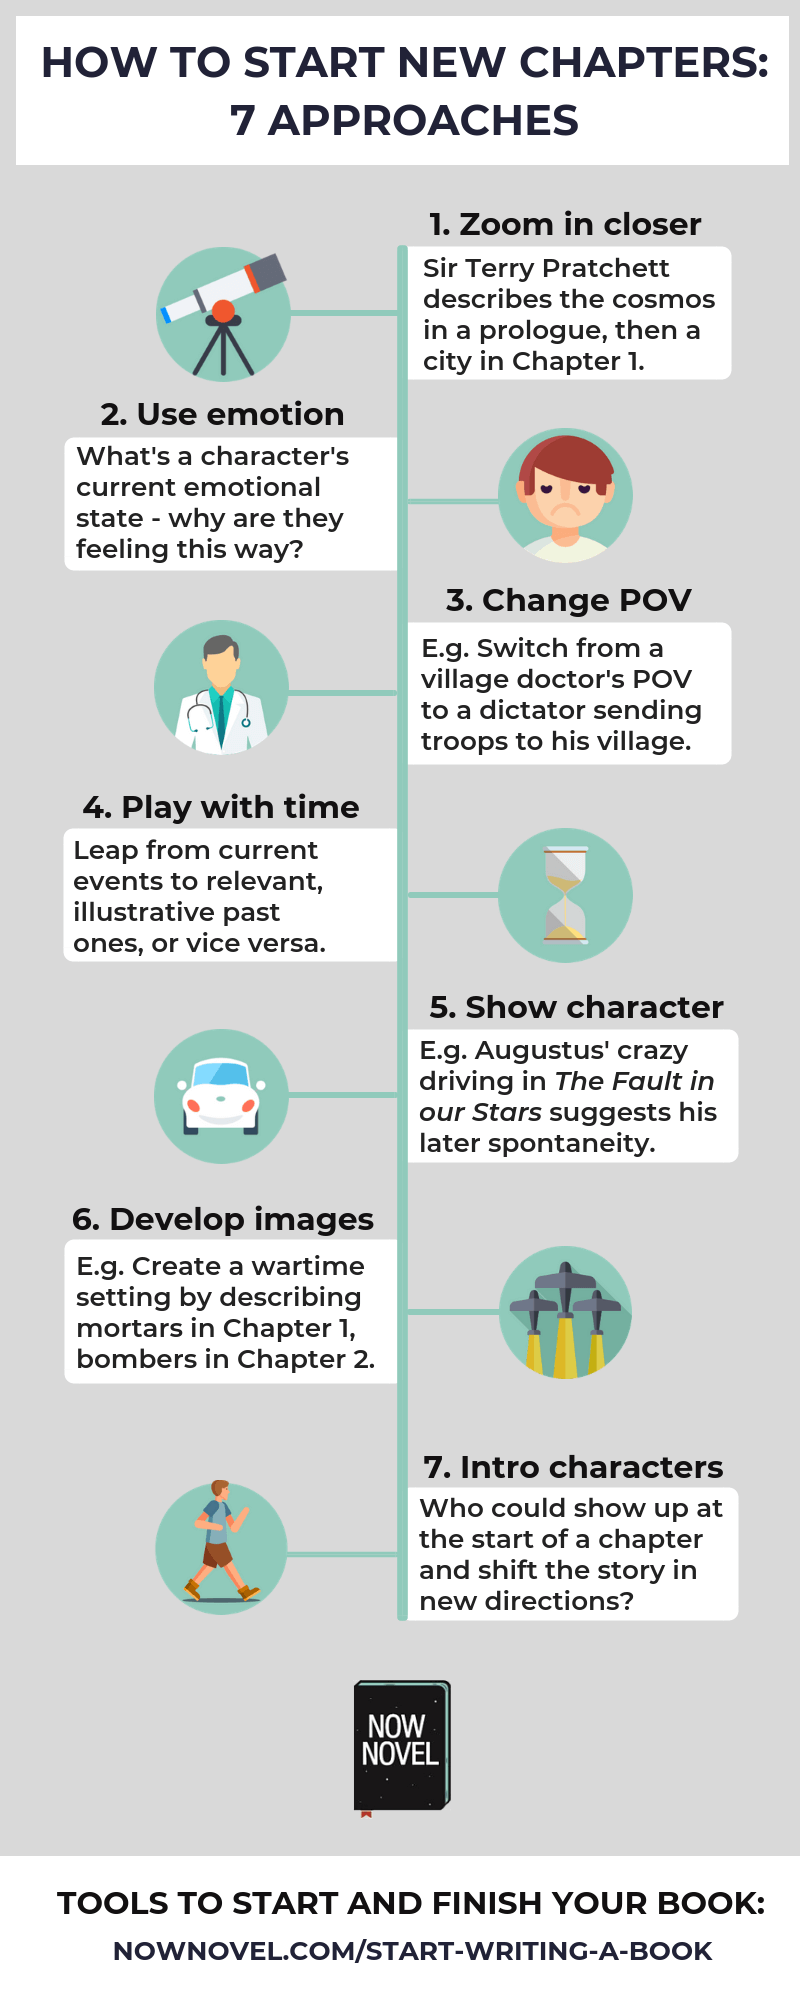 How to start new chapters - infographic | Now Novel